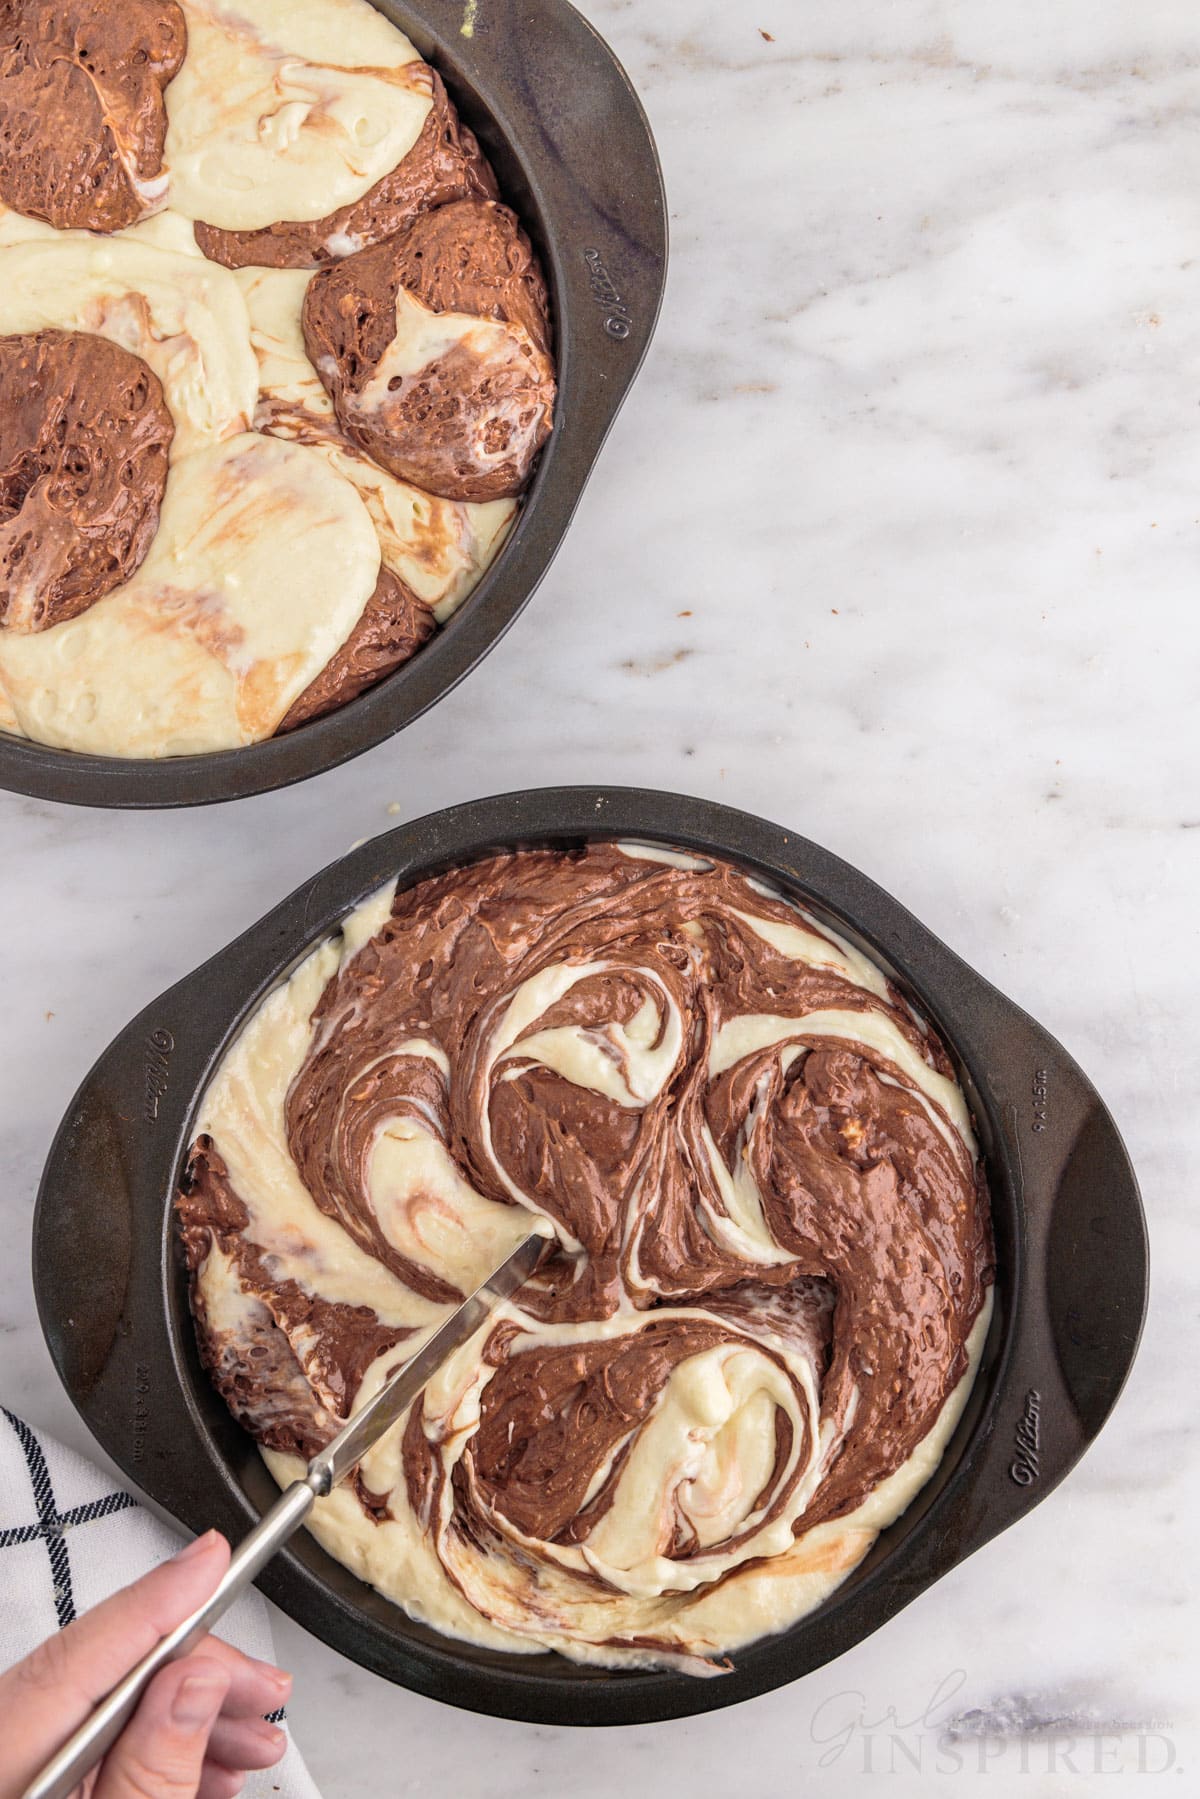 Cake pan with alternating scoops of vanilla and chocolate cake mix batter, second cake pan with vanilla and chocolate cake mix and hand over the mix with a metal knife gently creating swirls in the batter, checkered linen, on a marble countertop.